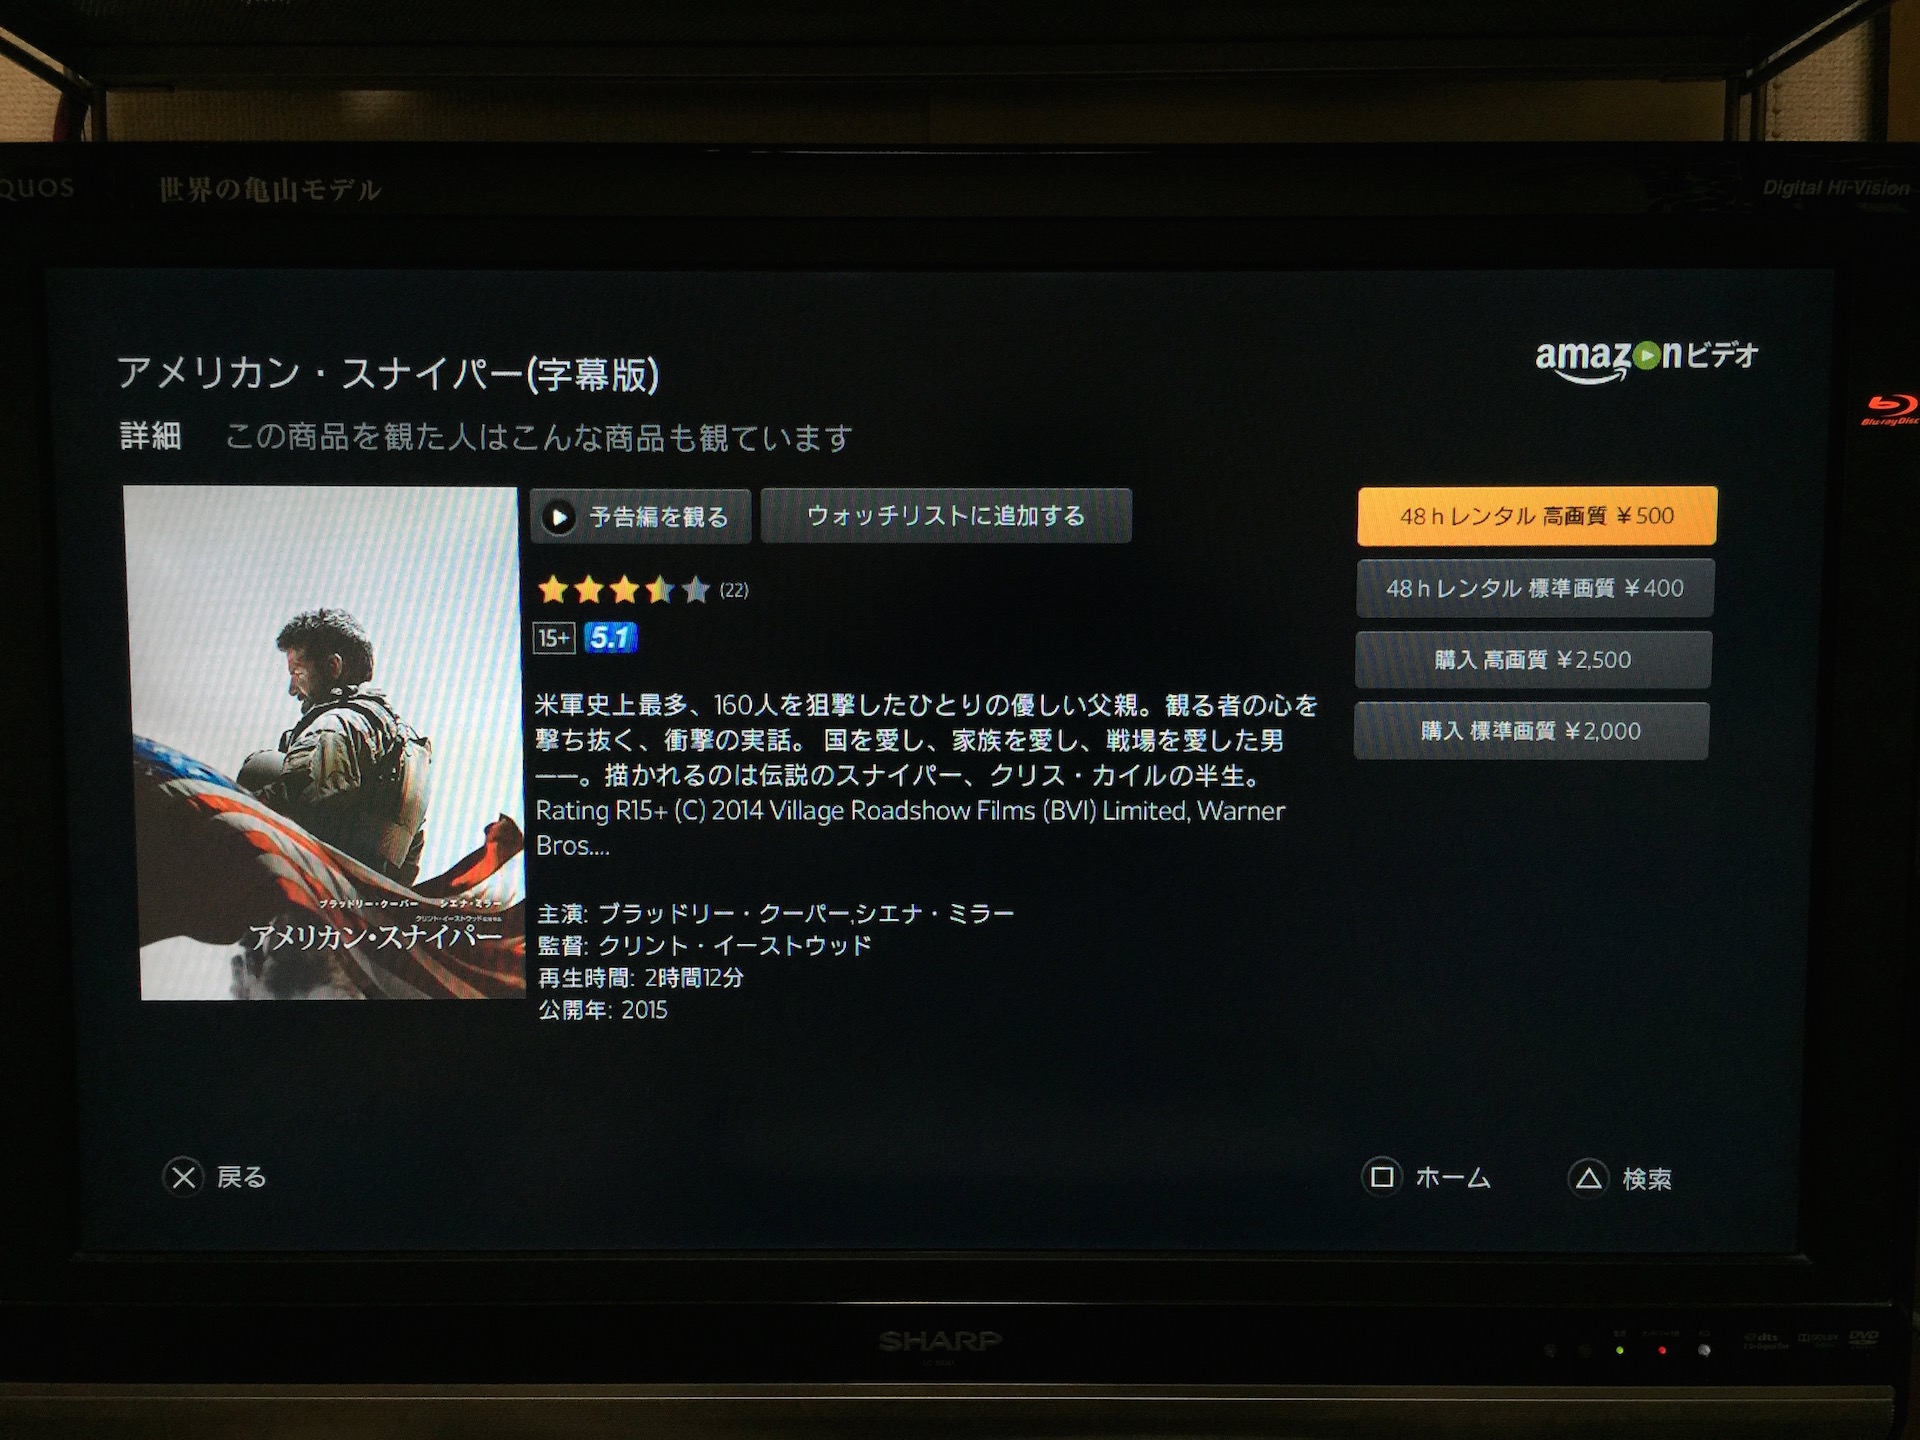 How to watch amazon video in playstation 4 10